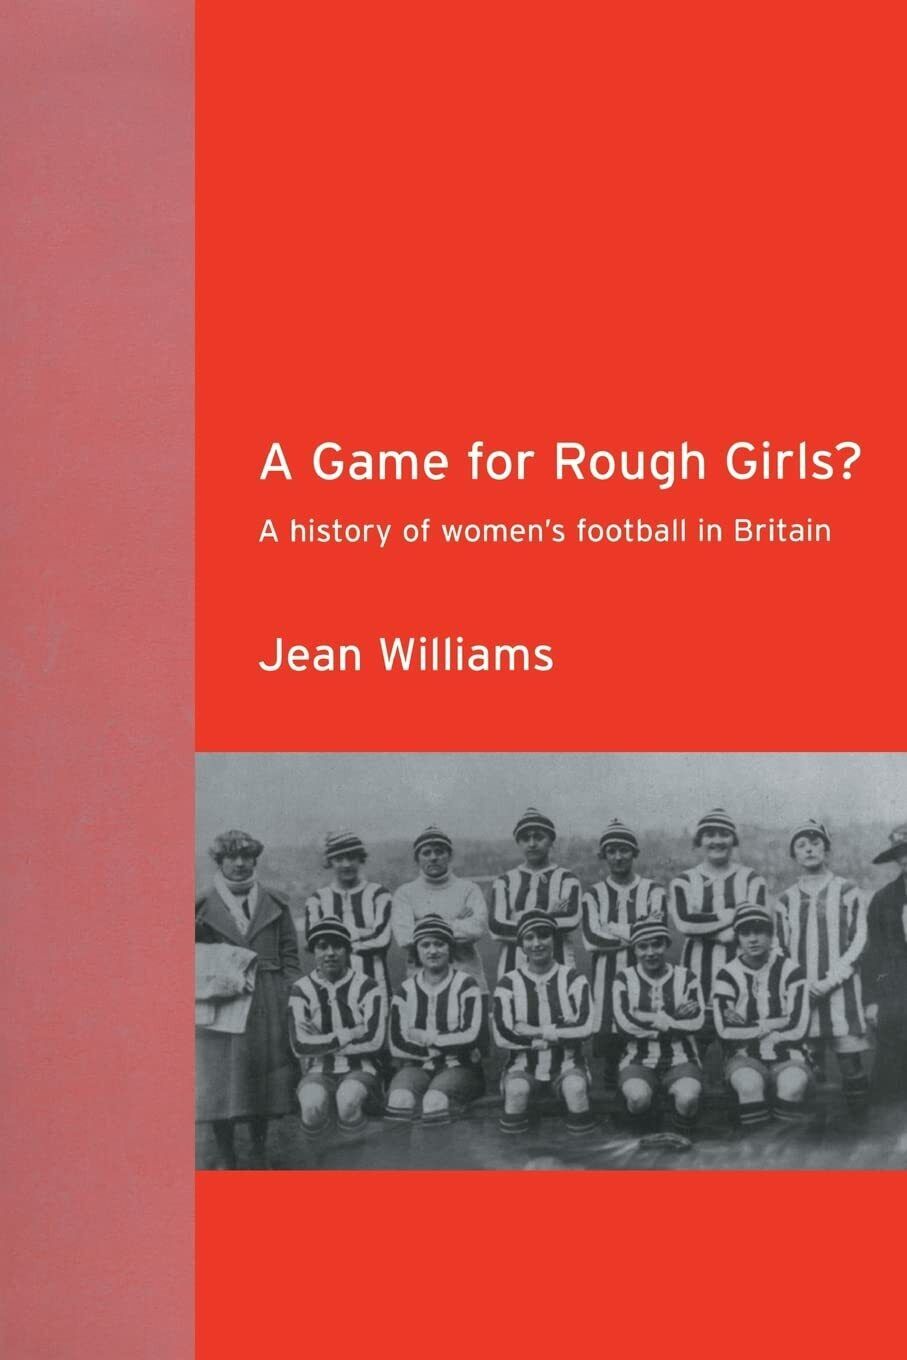 A Game for Rough Girls? - Jean Williams - Routledge, 2003